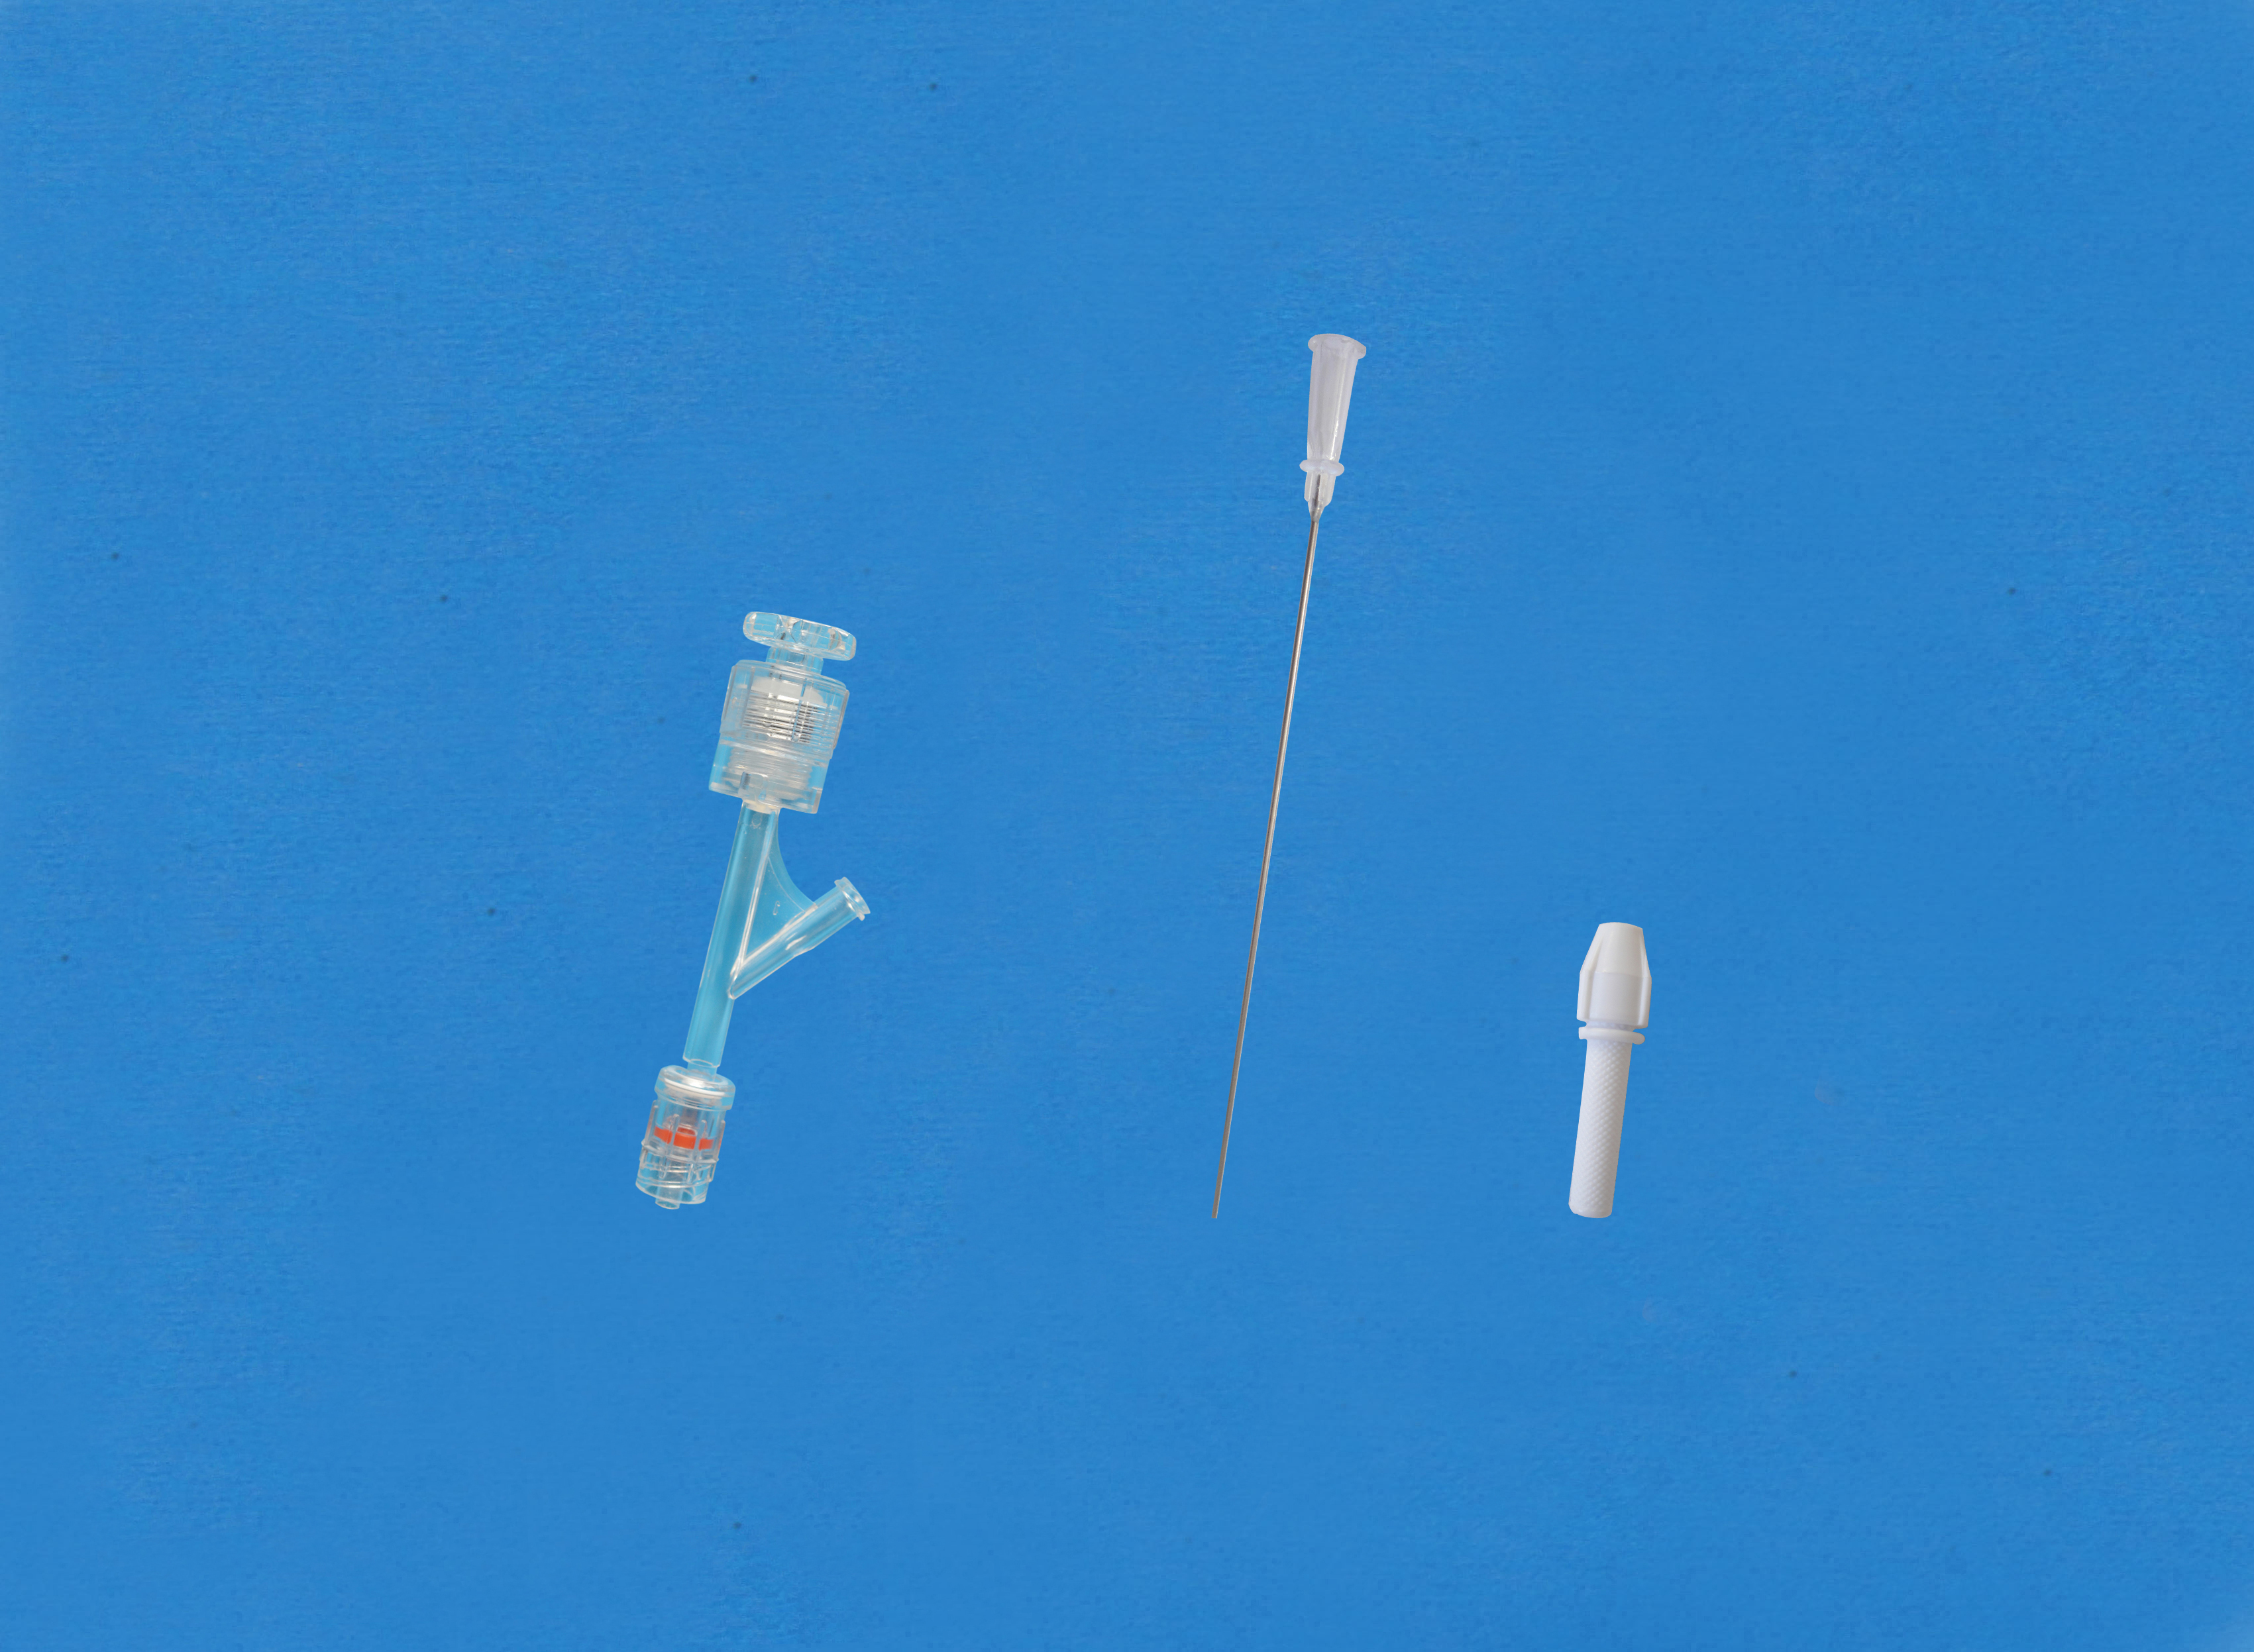 Haemostatic valves, Push-screw, Sideon Female Luer, Insertion Tool with Small Hub, White/Copper Torquer